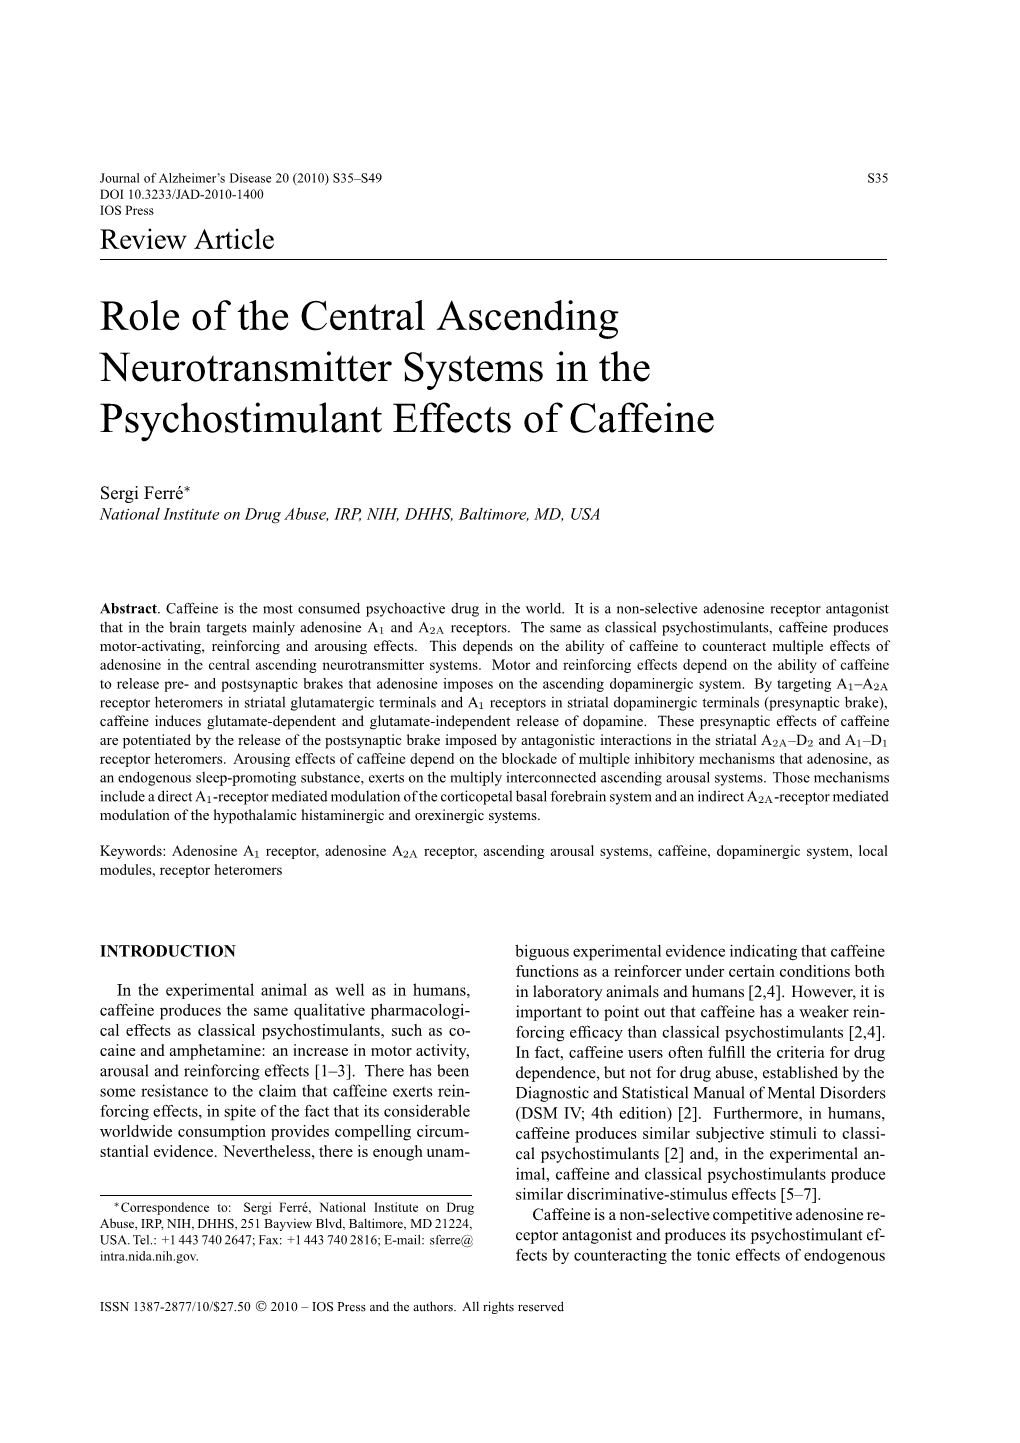 Role of the Central Ascending Neurotransmitter Systems in the Psychostimulant Effects of Caffeine